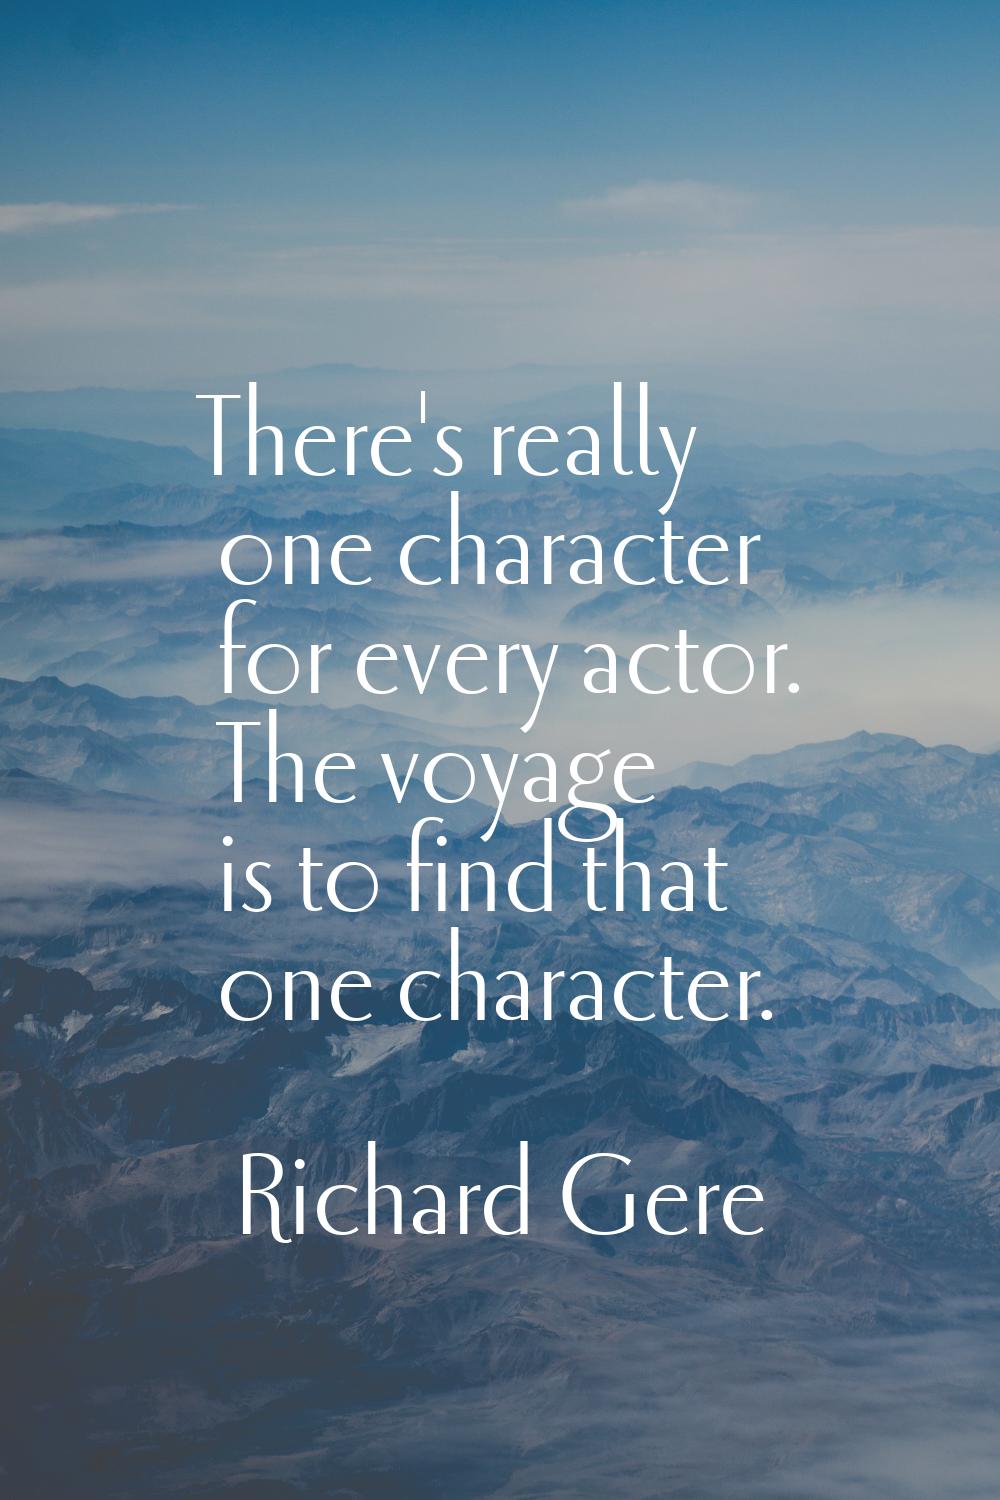 There's really one character for every actor. The voyage is to find that one character.